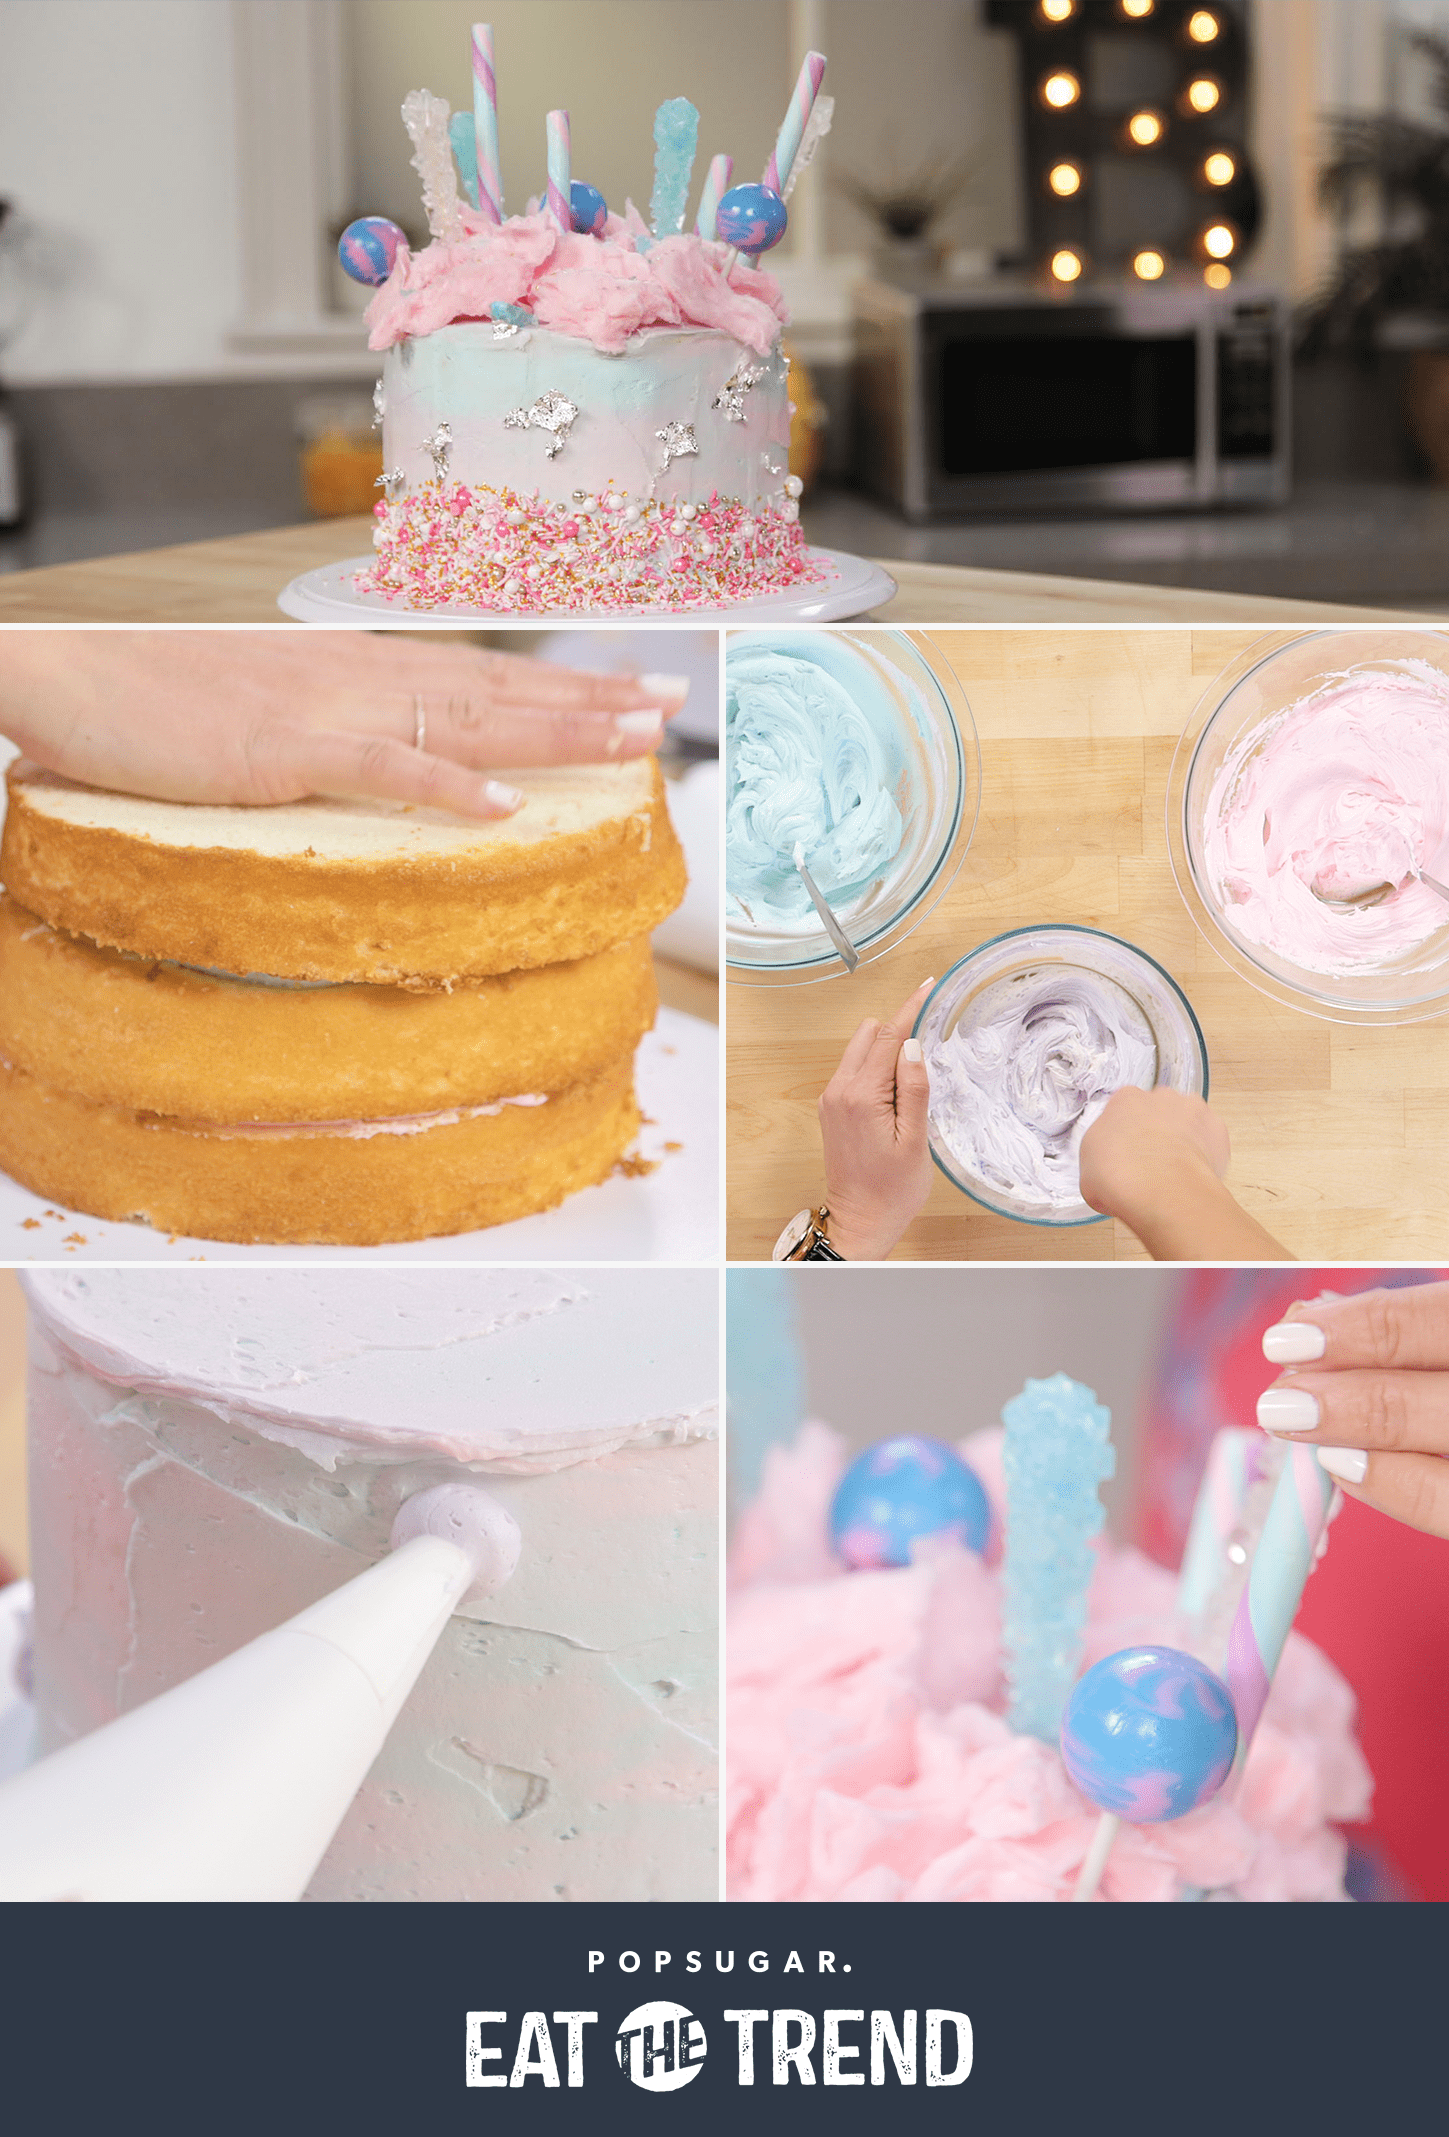 Cotton Candy Cake Is The Adorable New Recipe To Try